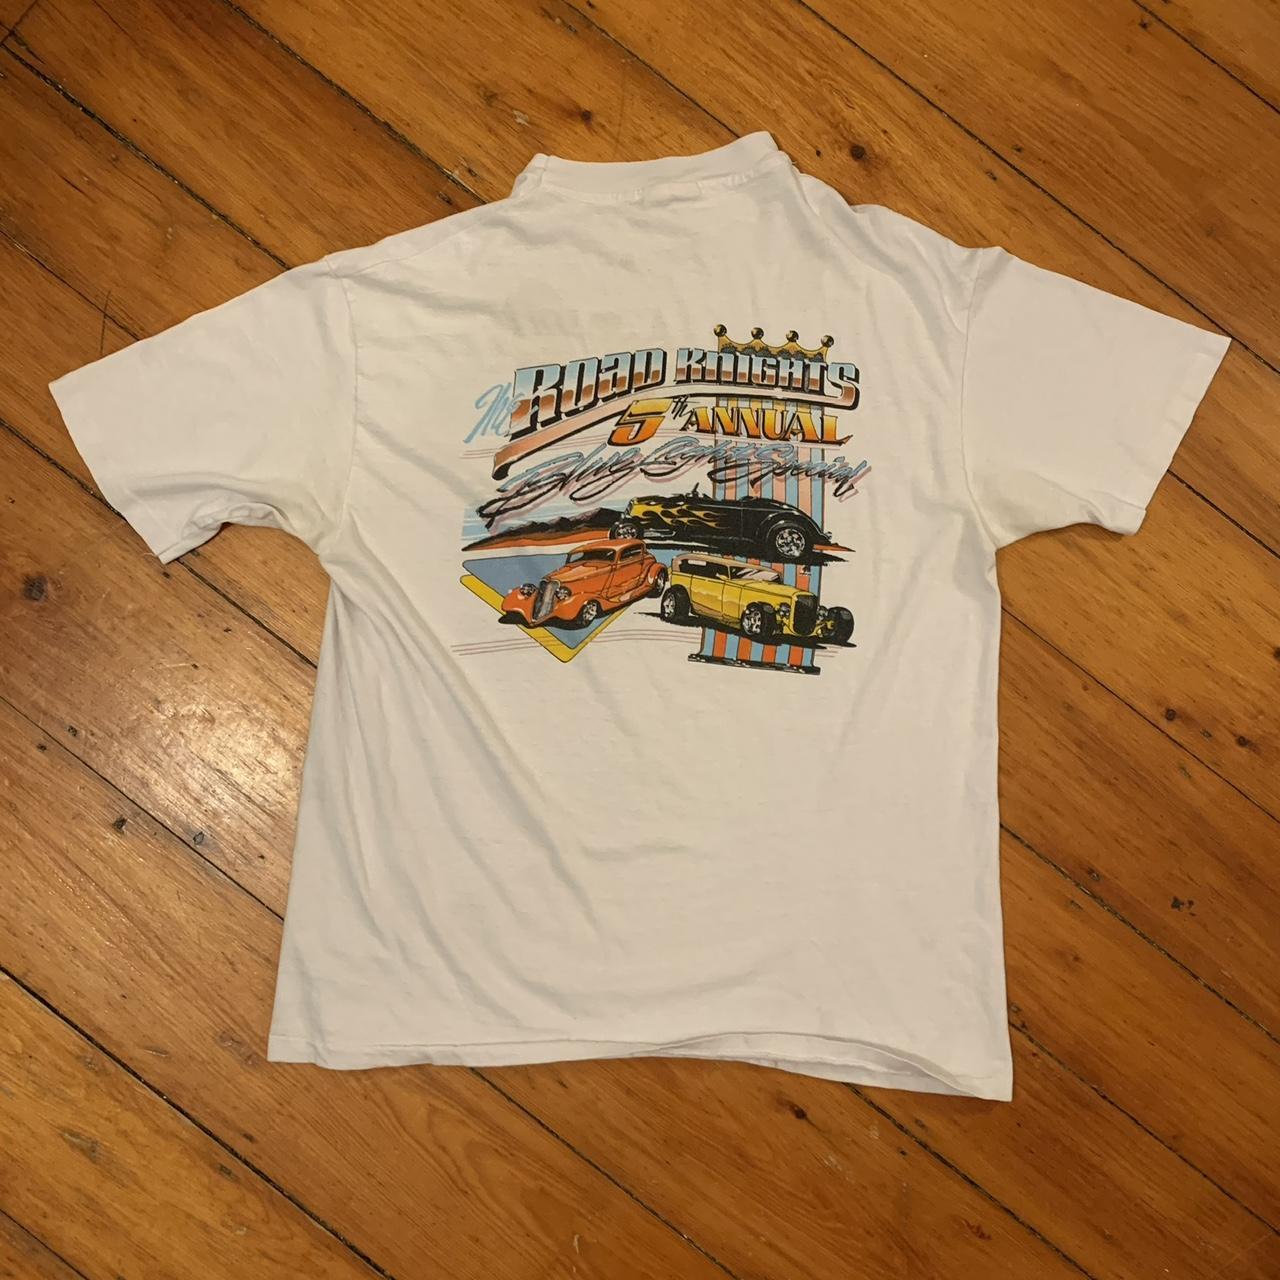 Hanes 1990’s The Road Knights 5th Annual Blue Light... - Depop